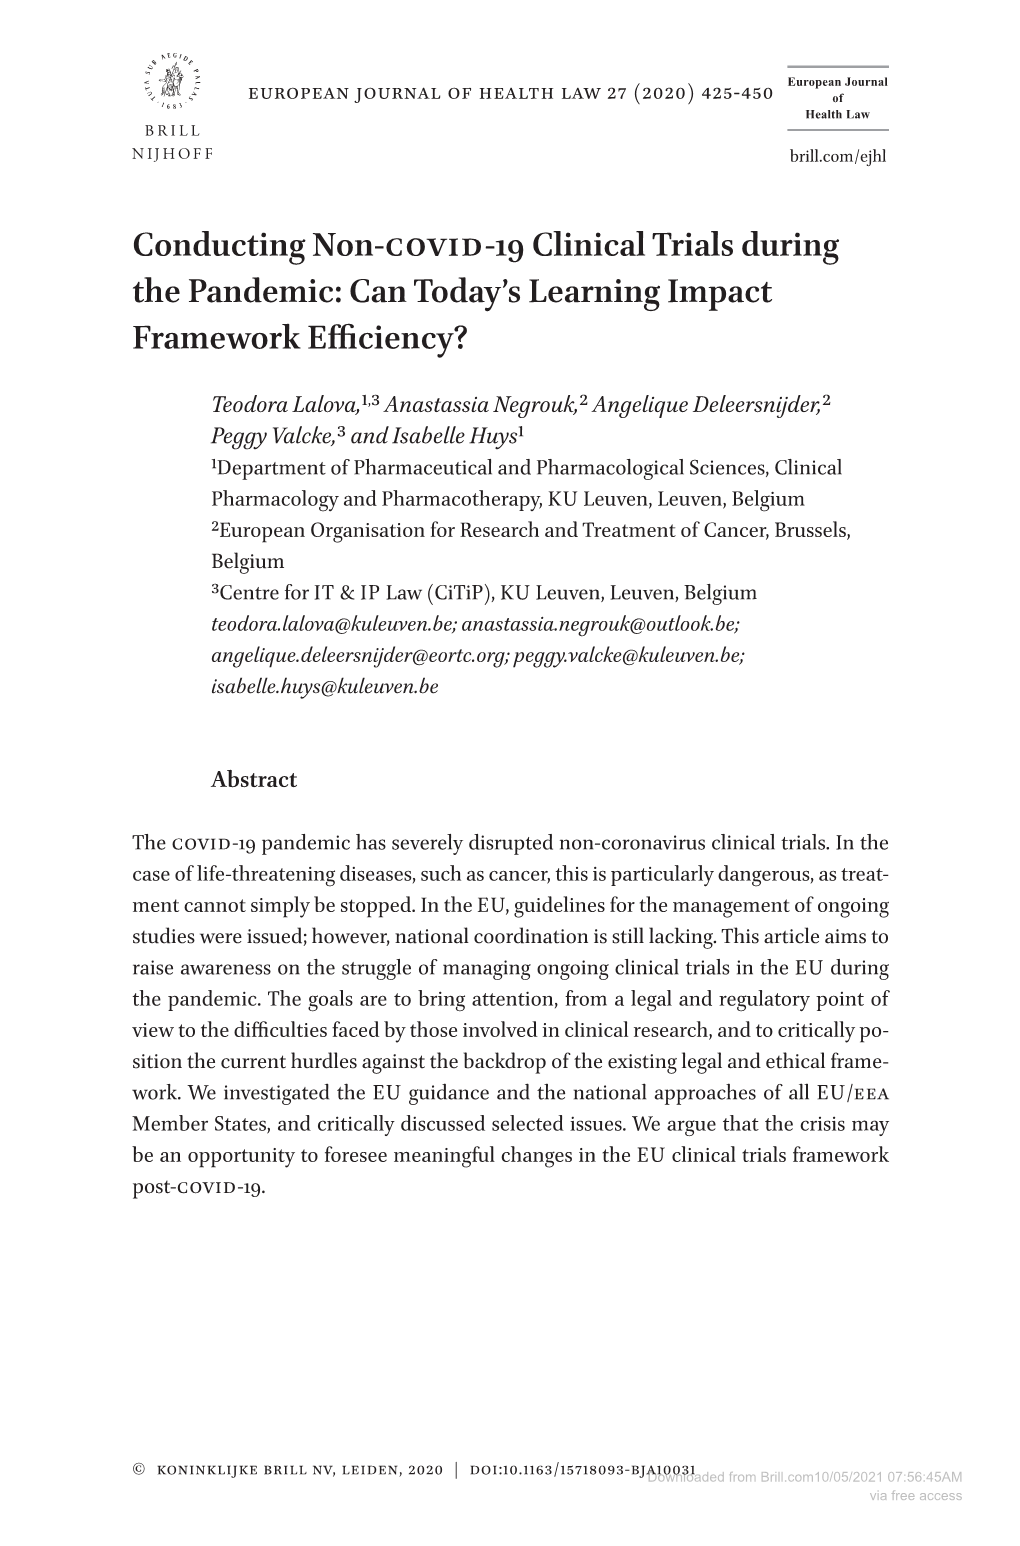 Conducting Non-COVID-19 Clinical Trials During the Pandemic: Can Today’S Learning Impact Framework Efficiency?